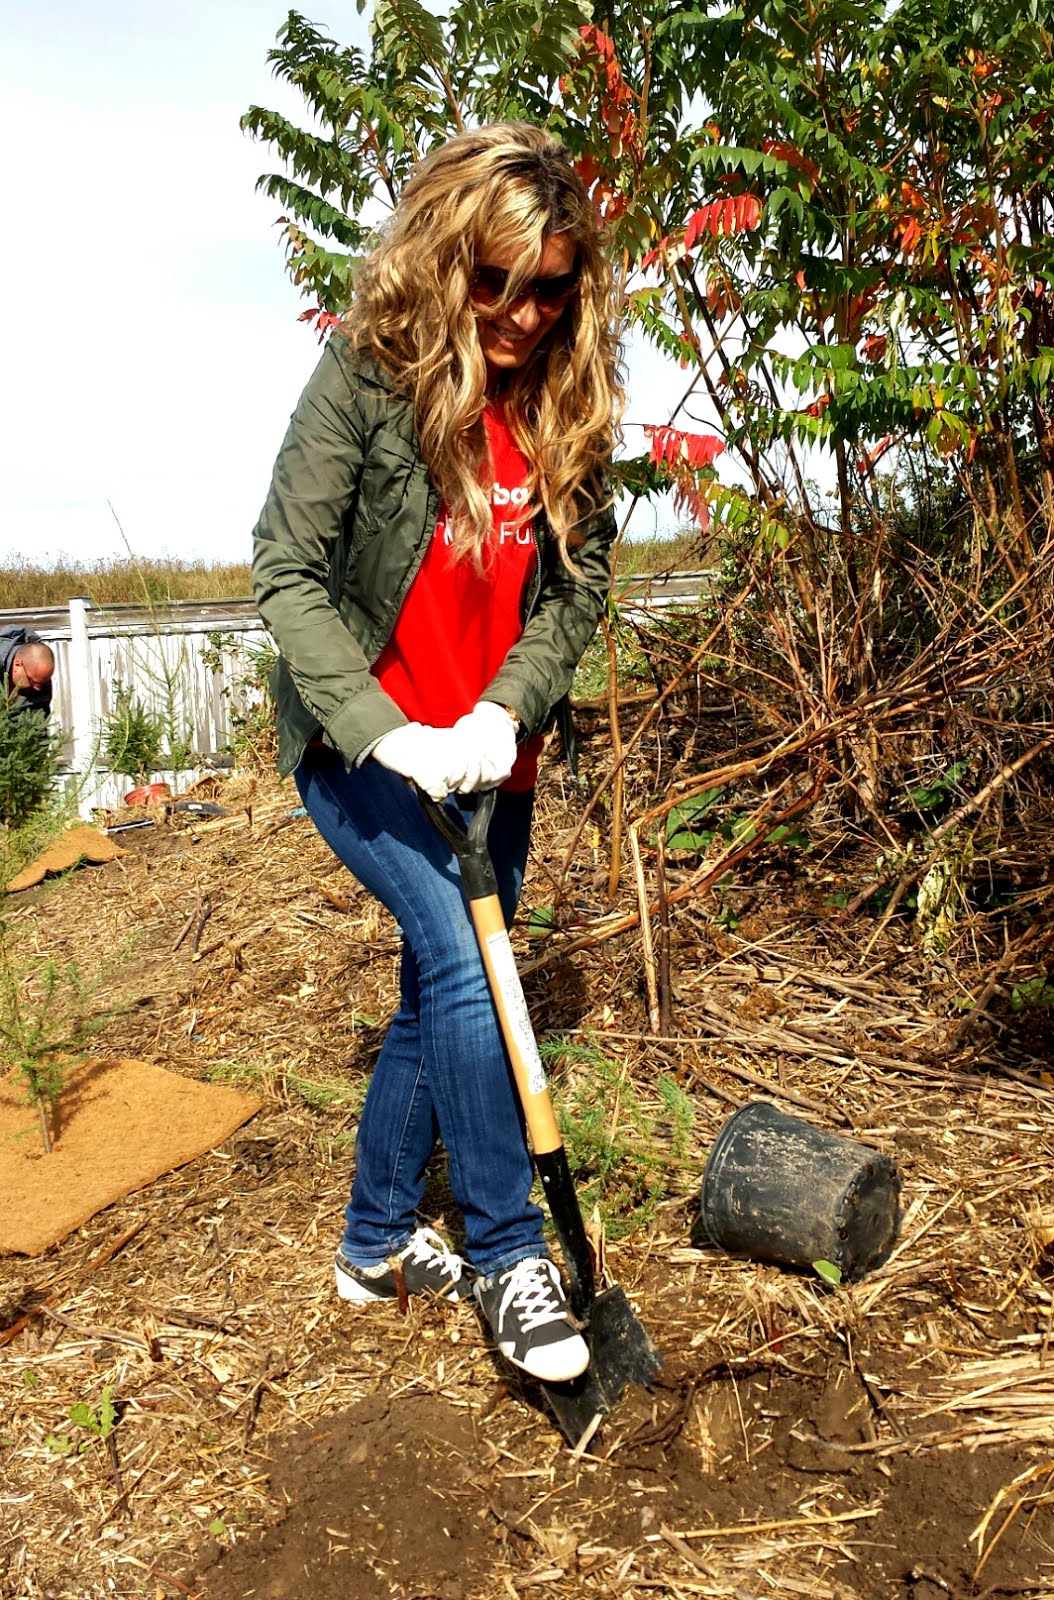 Planting trees for Scotiabank "Branching Out" Program